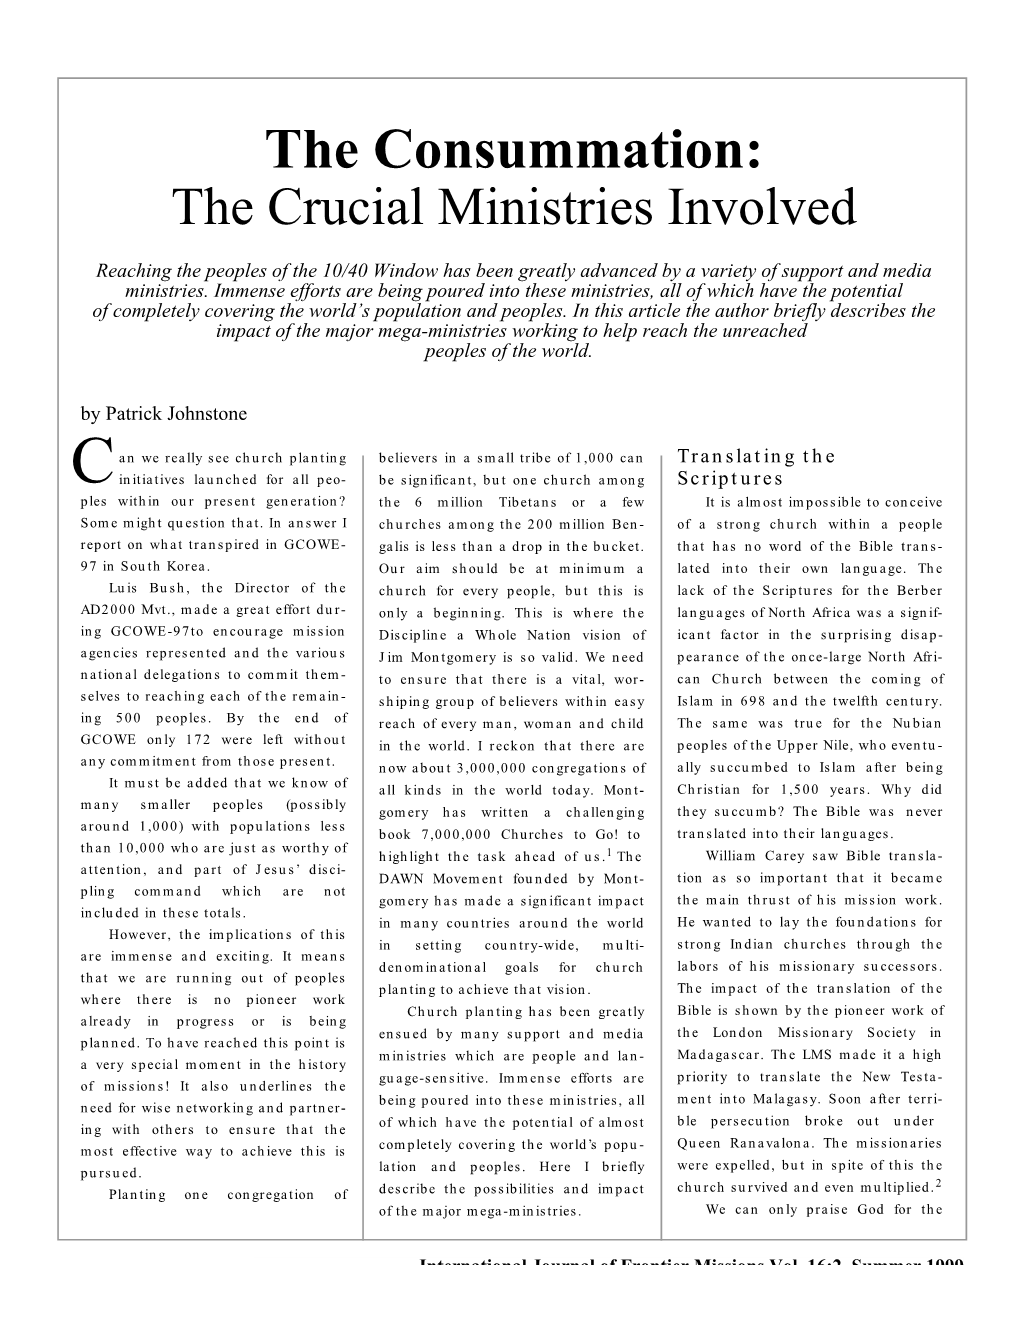 The Consummation: the Crucial Ministries Involved